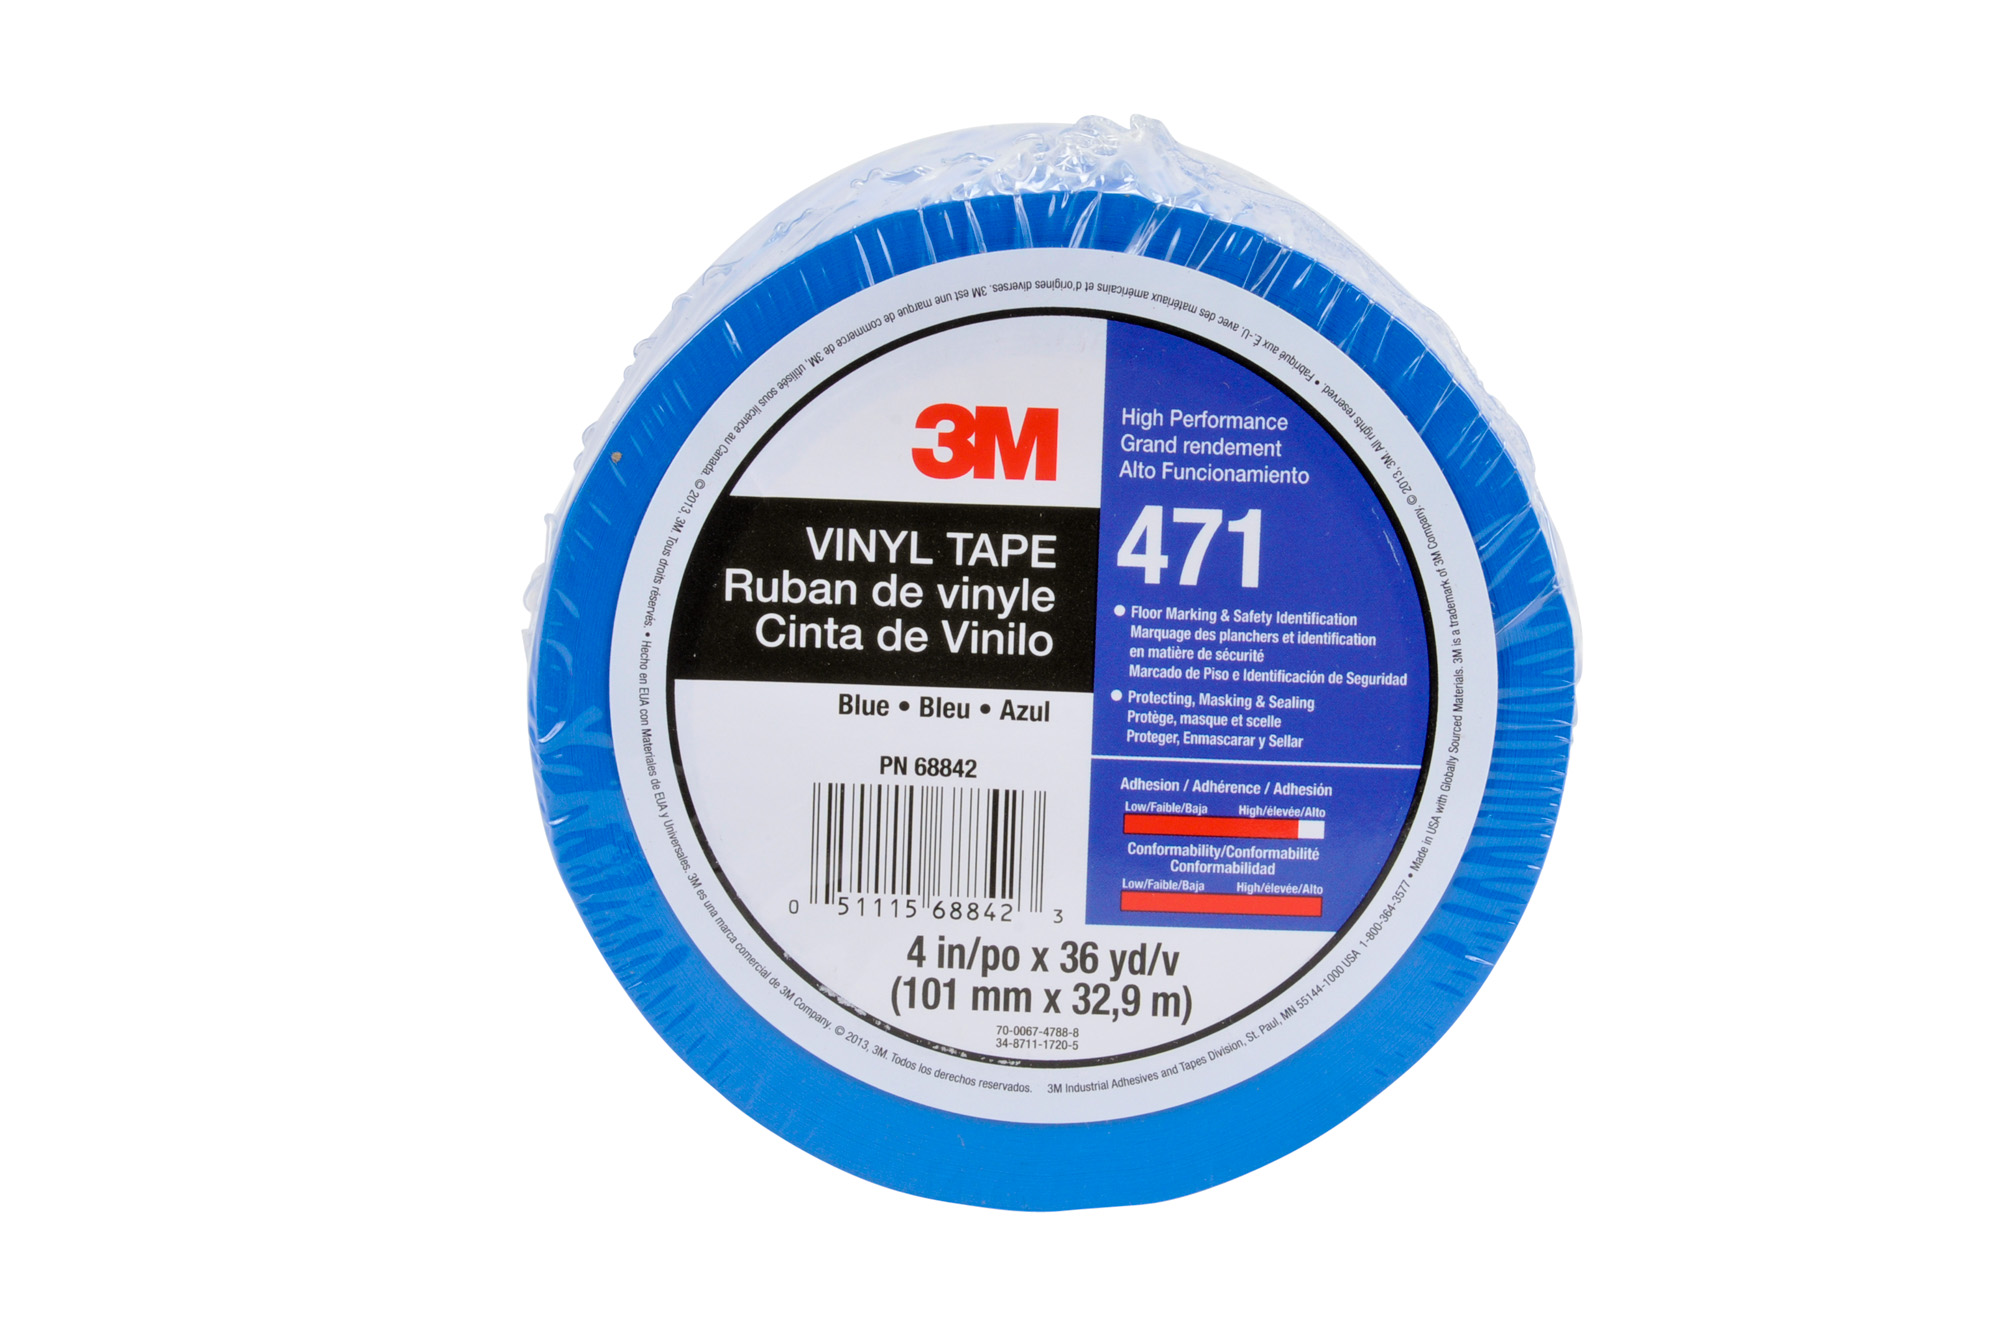 3M 361 4 x 6-25 White Glass Cloth/Silicone Adhesive Electrical Tape 3M 361 4 x 6-25 -65 degrees F to 450 degrees F Pack of 25 Pack of 25 4 Width 6 Length 6 Length 4 Width 